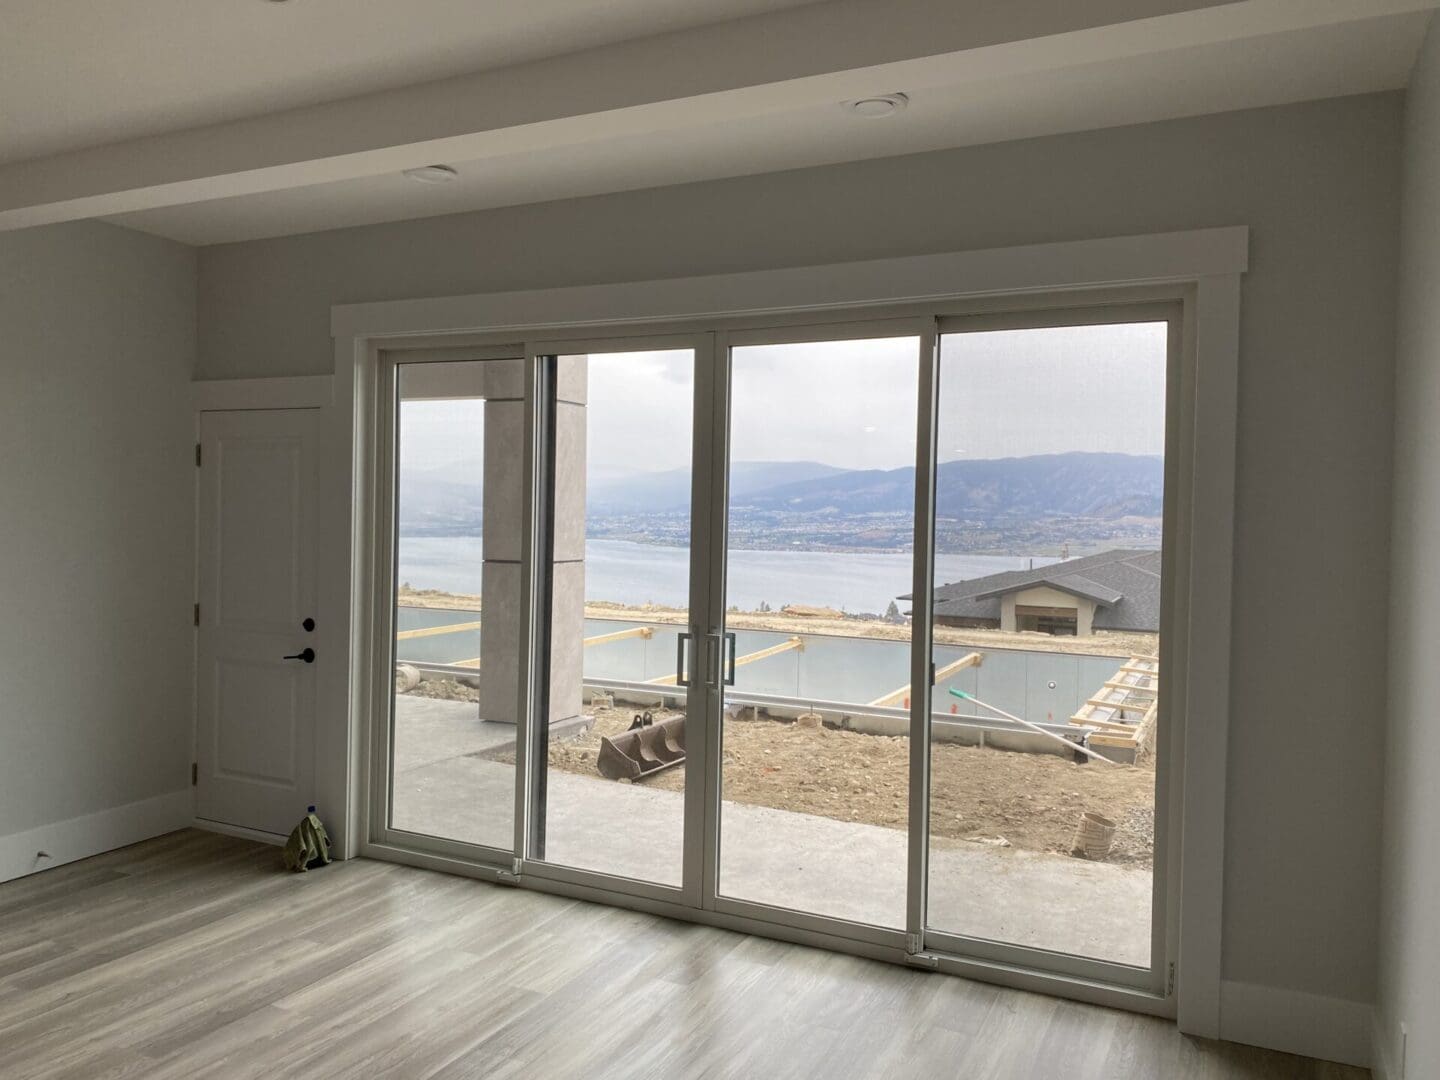 A room with sliding glass doors and a view of the water.